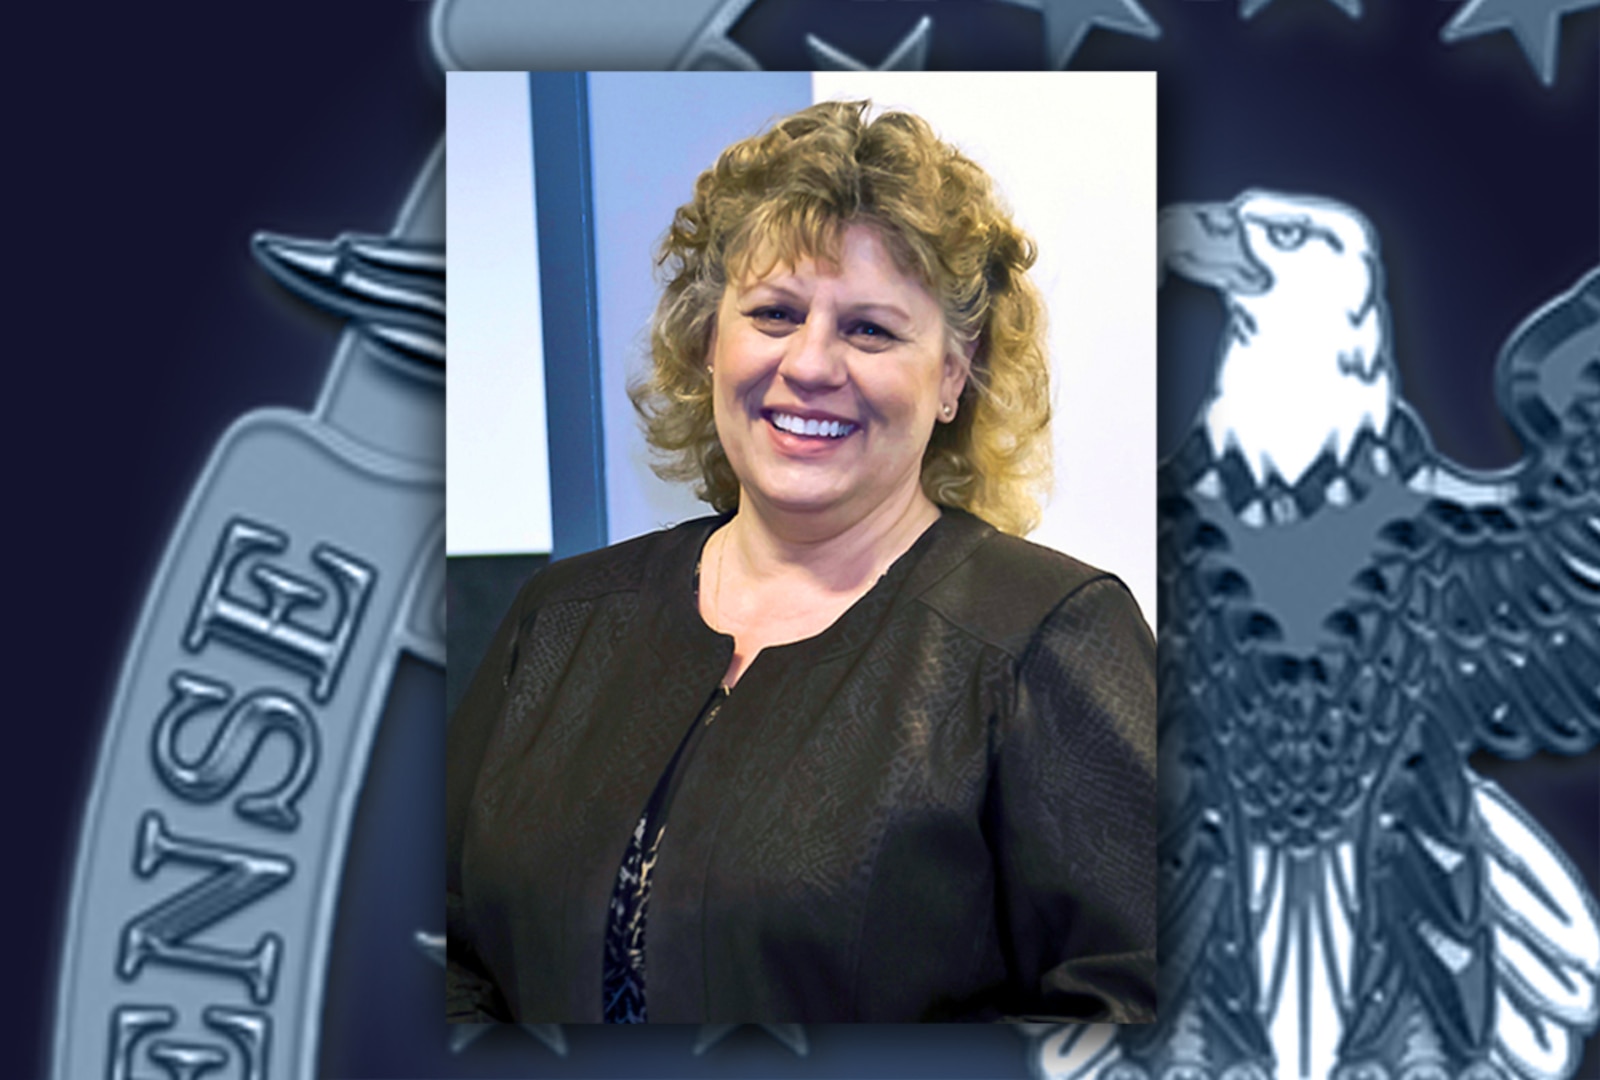 Paula Kluczynski developed and managed DLA's New Supervisor Certificate Program, which has helped transform employees into leaders for more than 12 years—earning her a place in the DLA Hall of Fame.